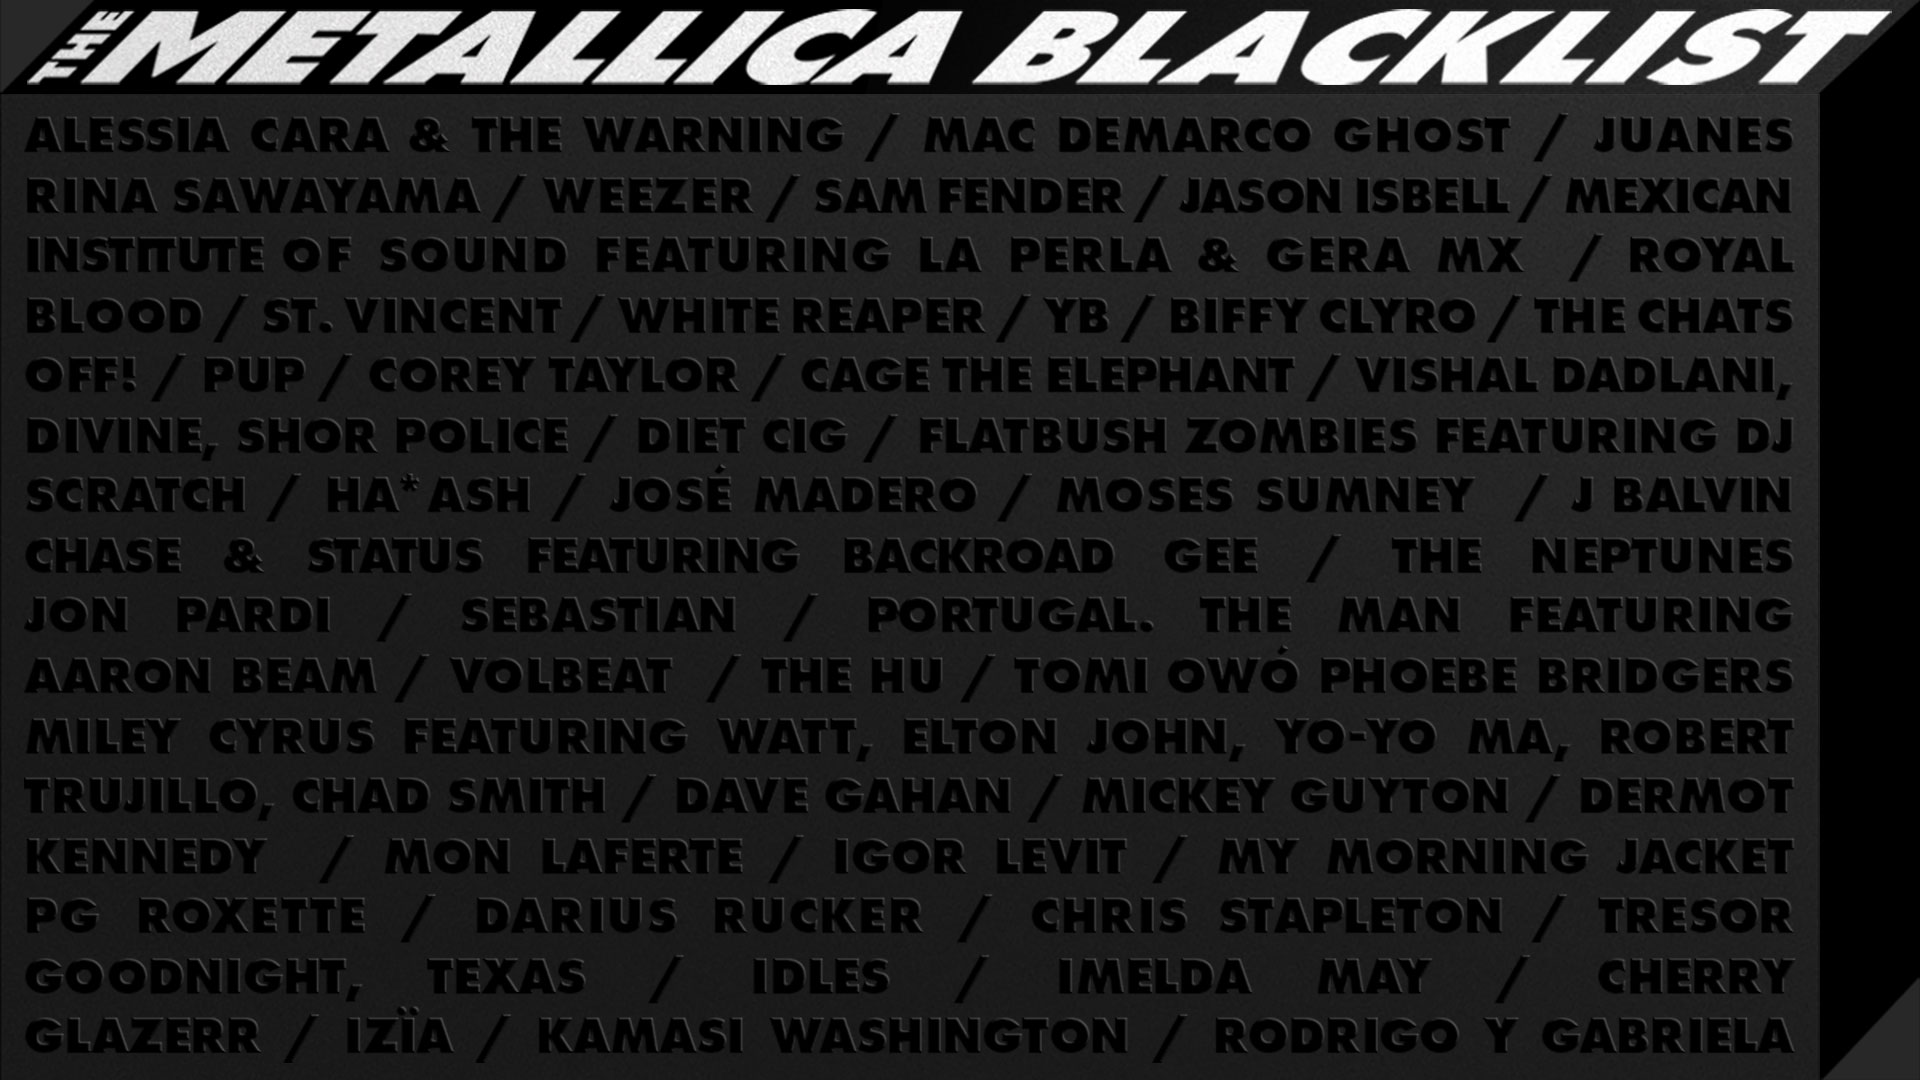 Metallica's Black Album Gets 53 All-Star Covers in 'Blacklist': Review